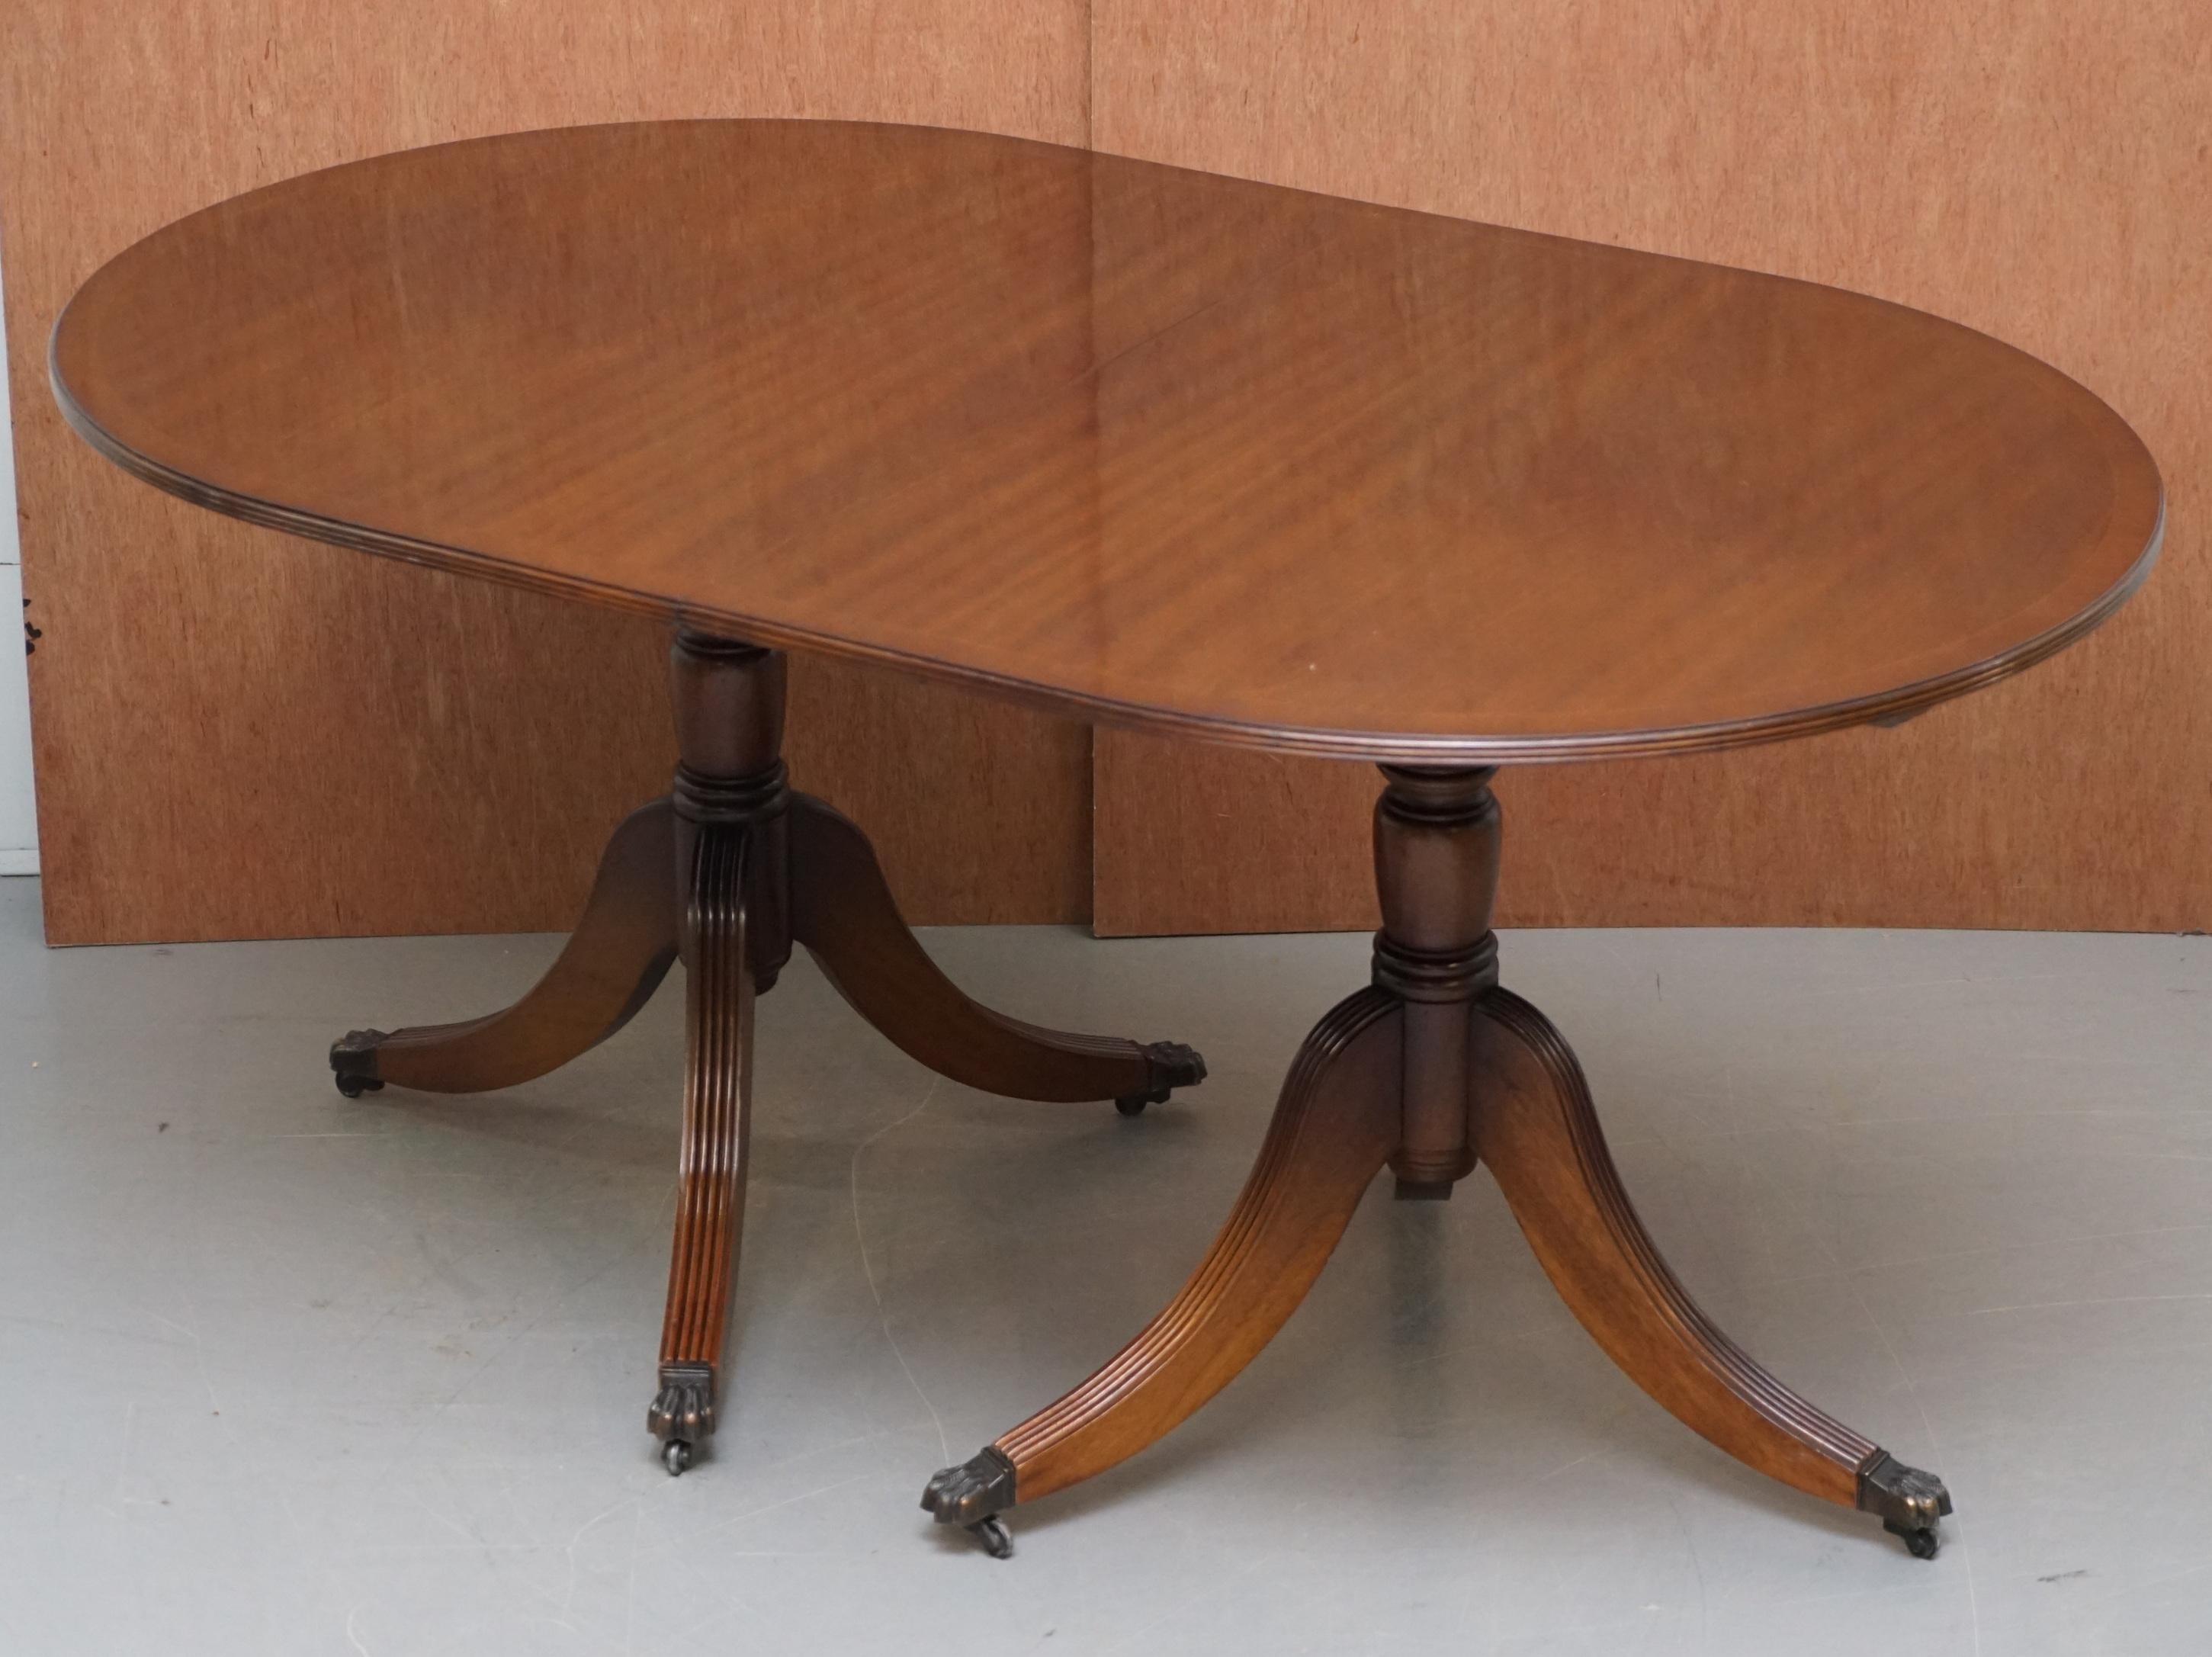 Hand-Crafted Extending Tilt Top Oval Dining Table in the Regency Style Solid Hardwood Castors